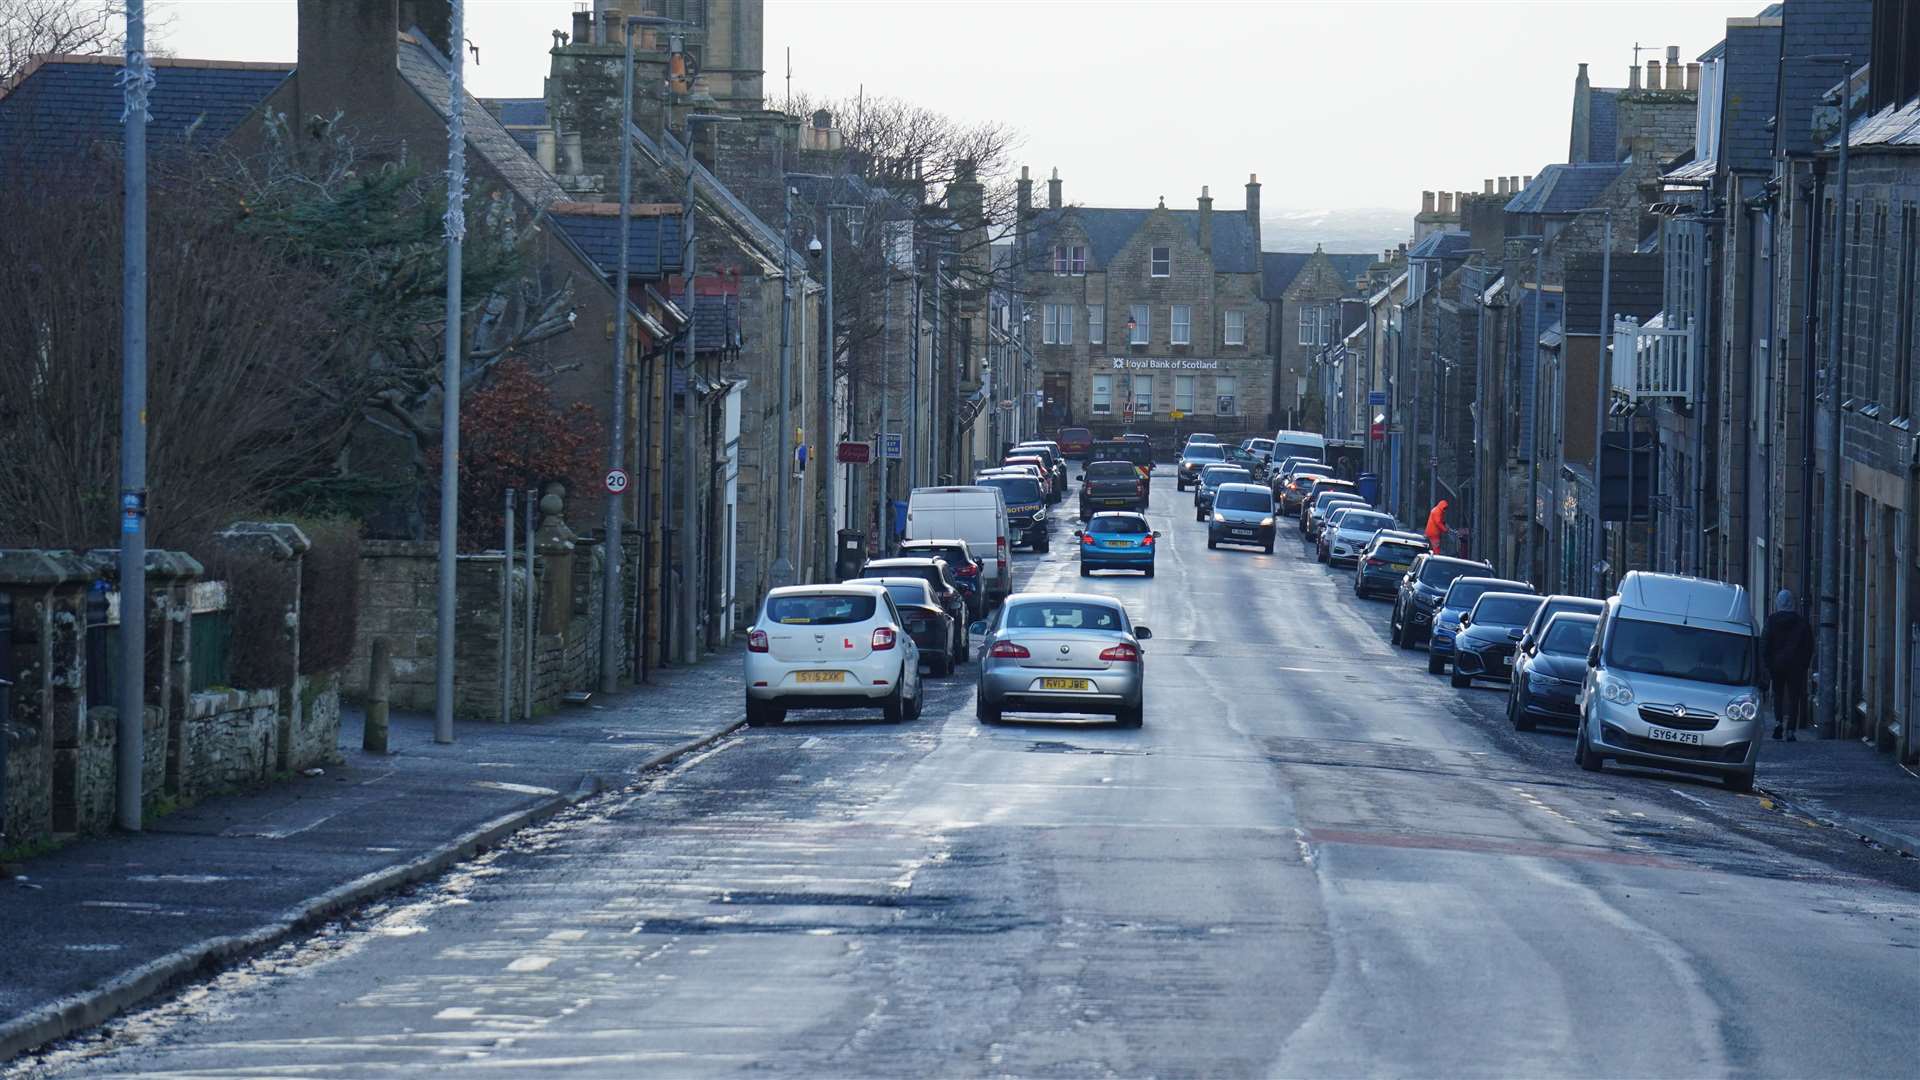 The offence took place on Princes Street in Thurso.